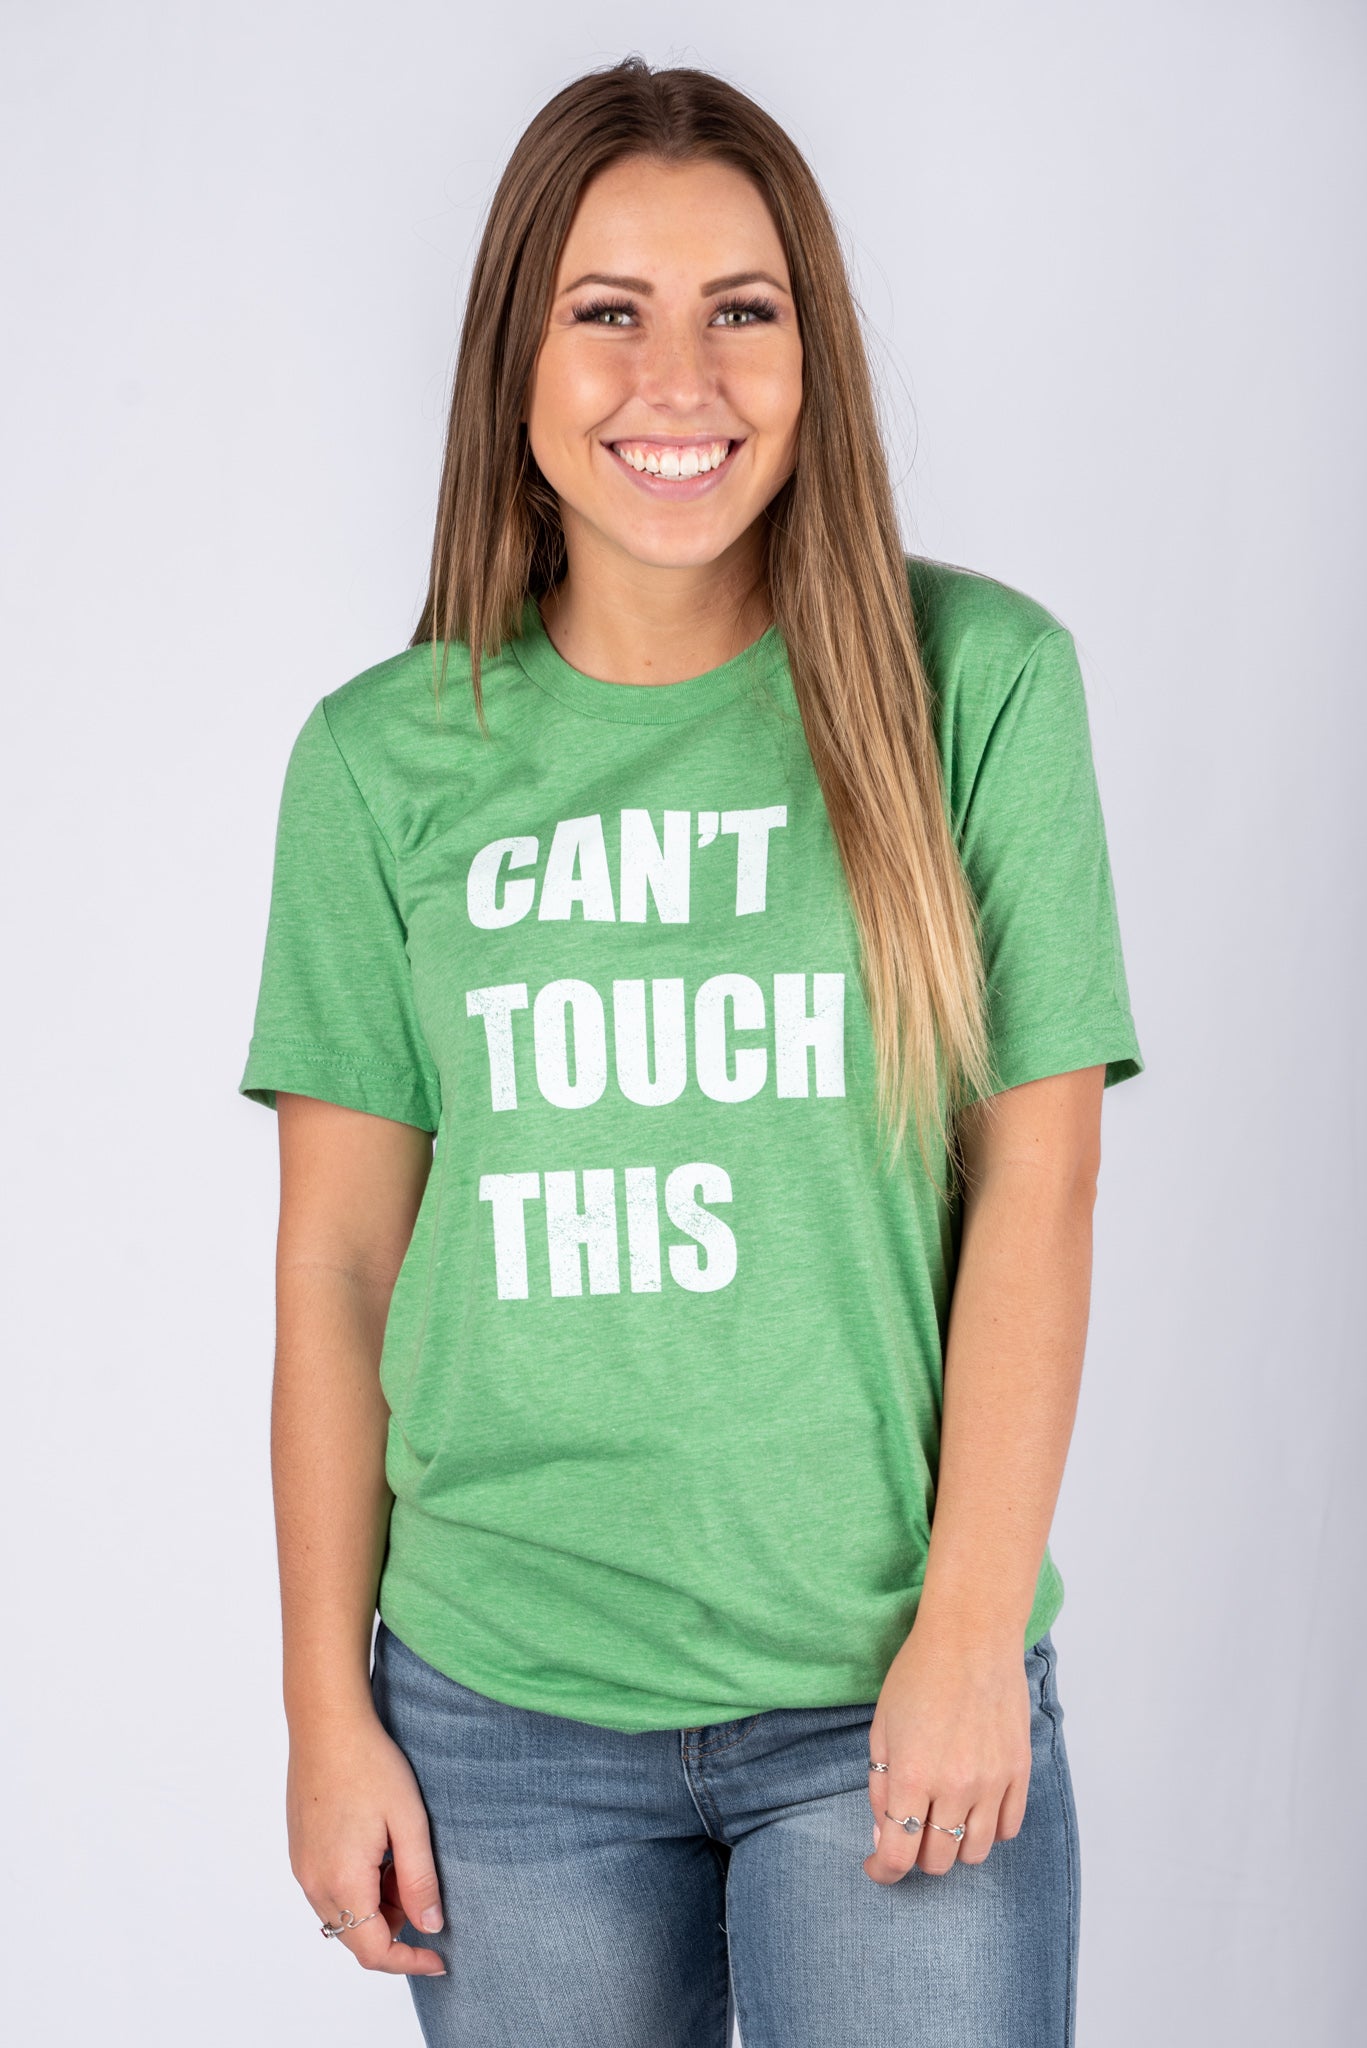 Can't Touch This Unisex Green T-shirt - Trendy T-shirts - Cute Graphic Tee Fashion at Lush Fashion Lounge Boutique in Oklahoma